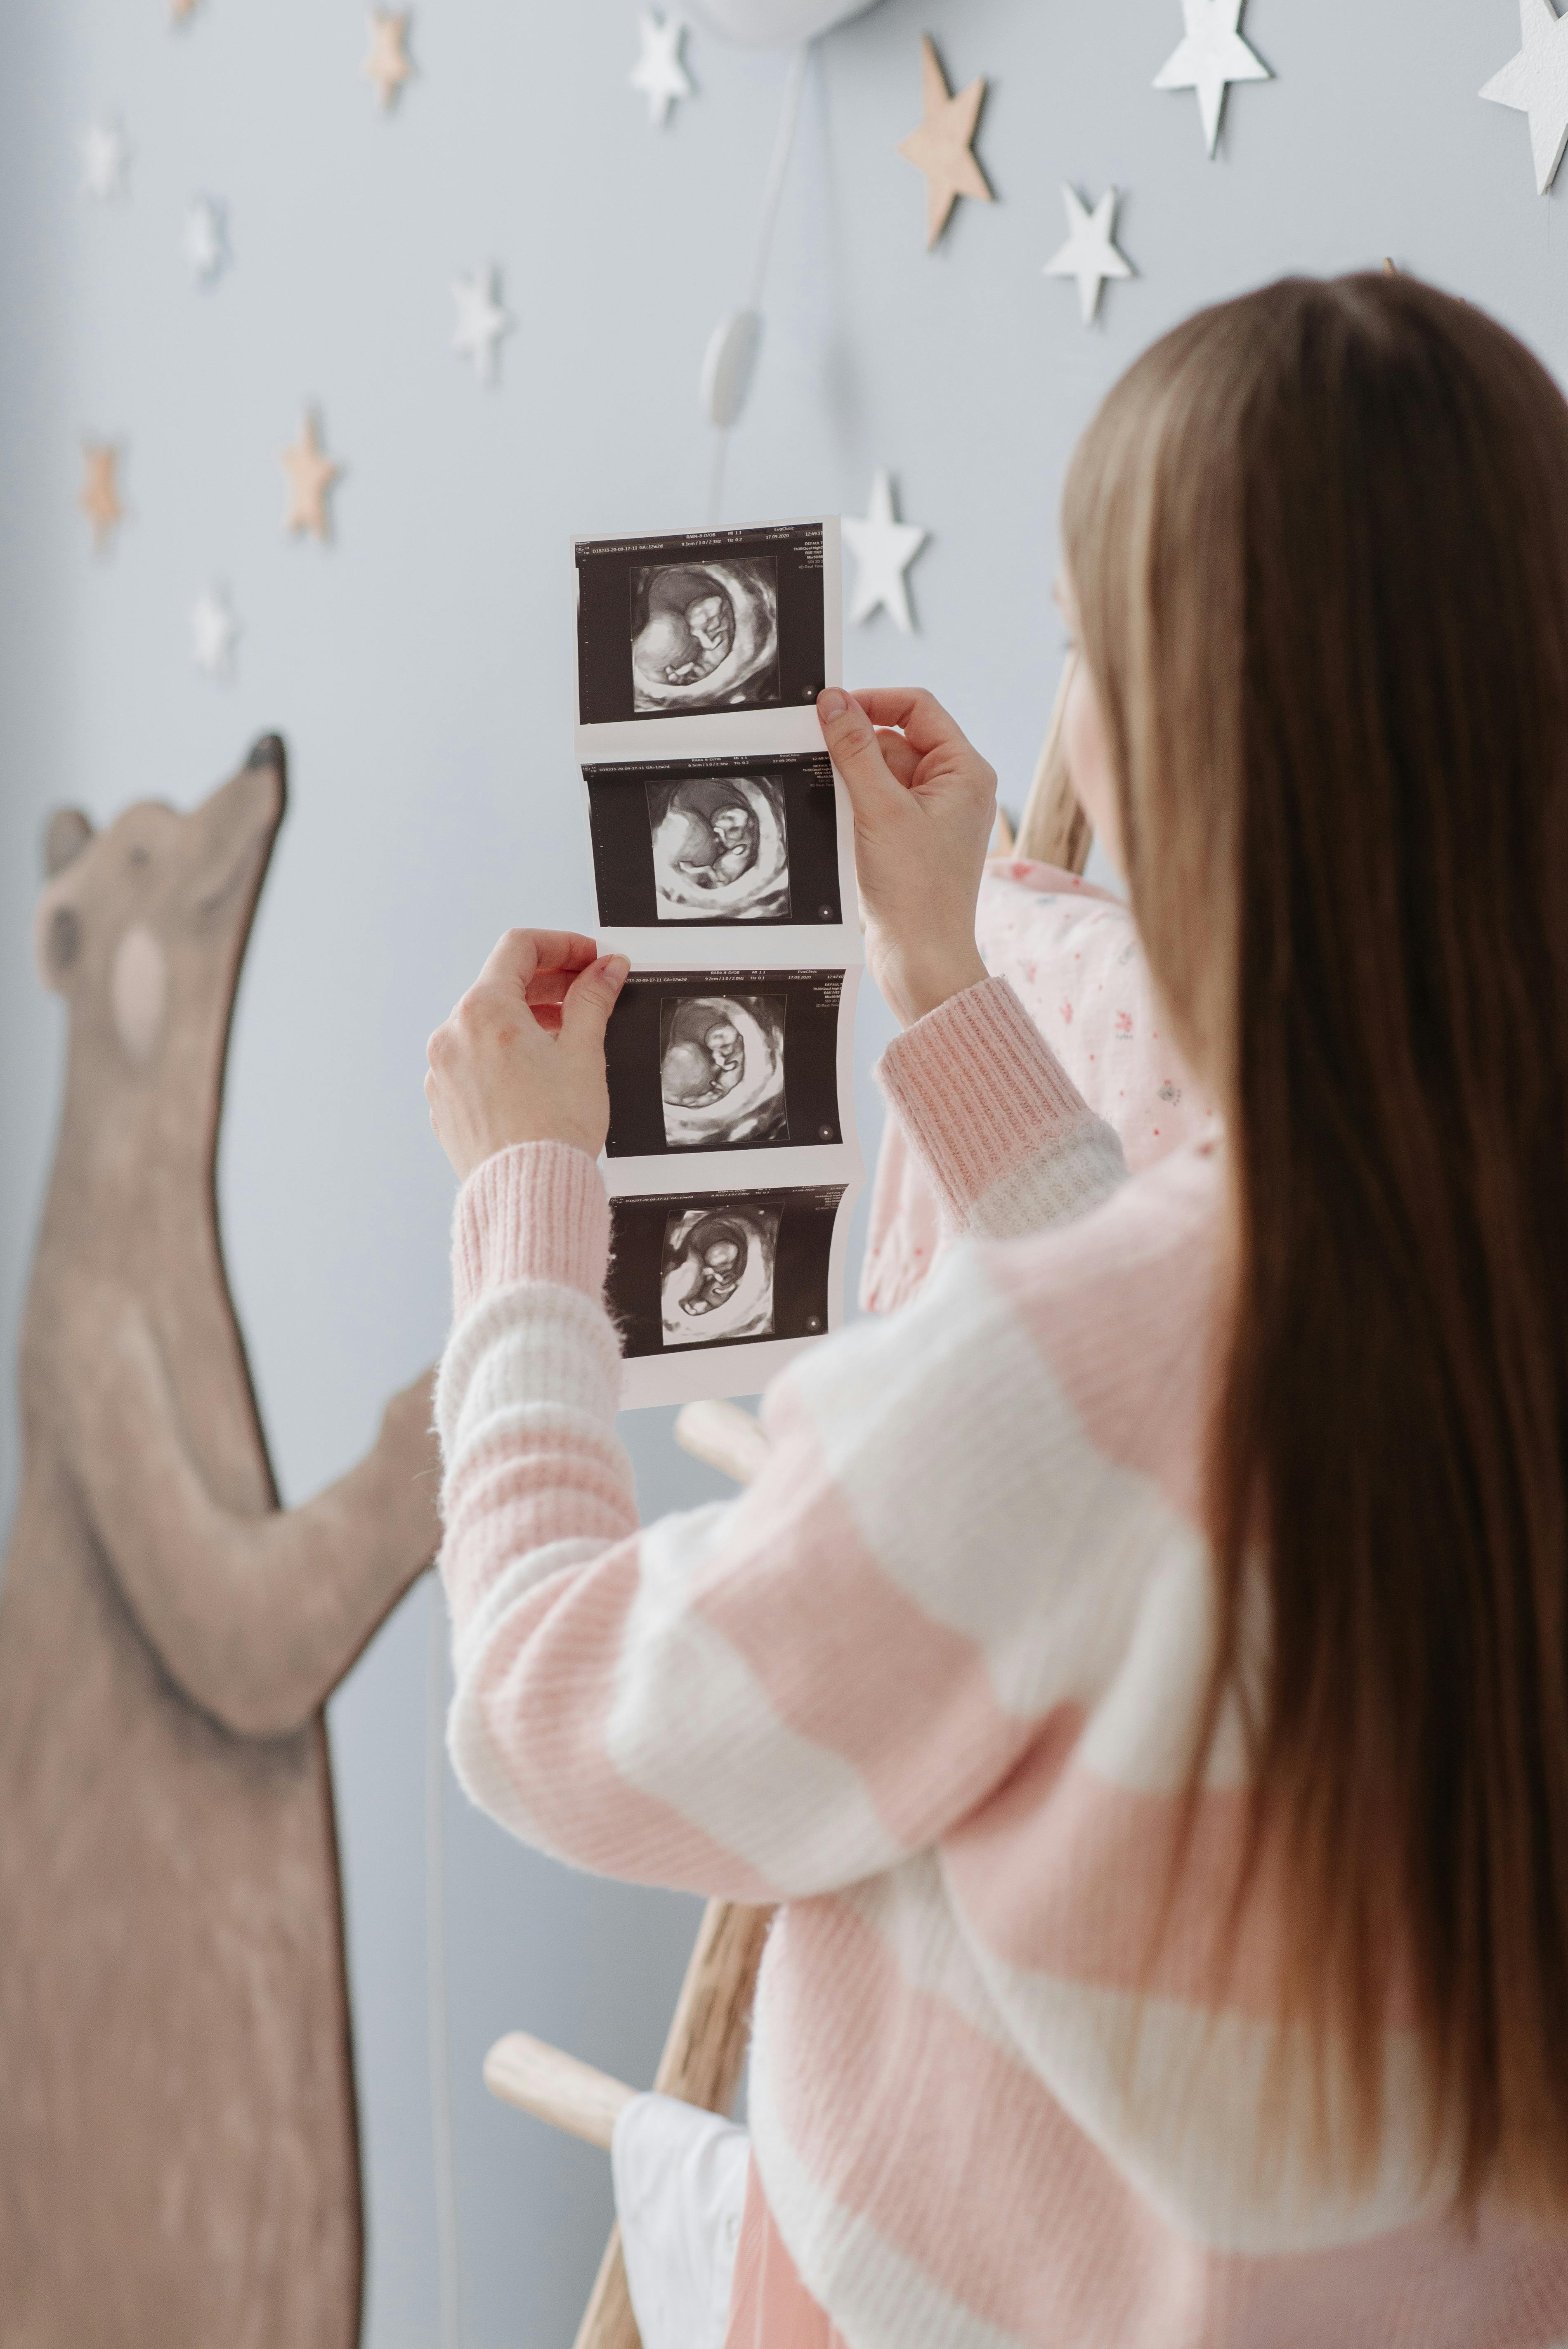 A woman holding ultrasound results I Source: Pexels